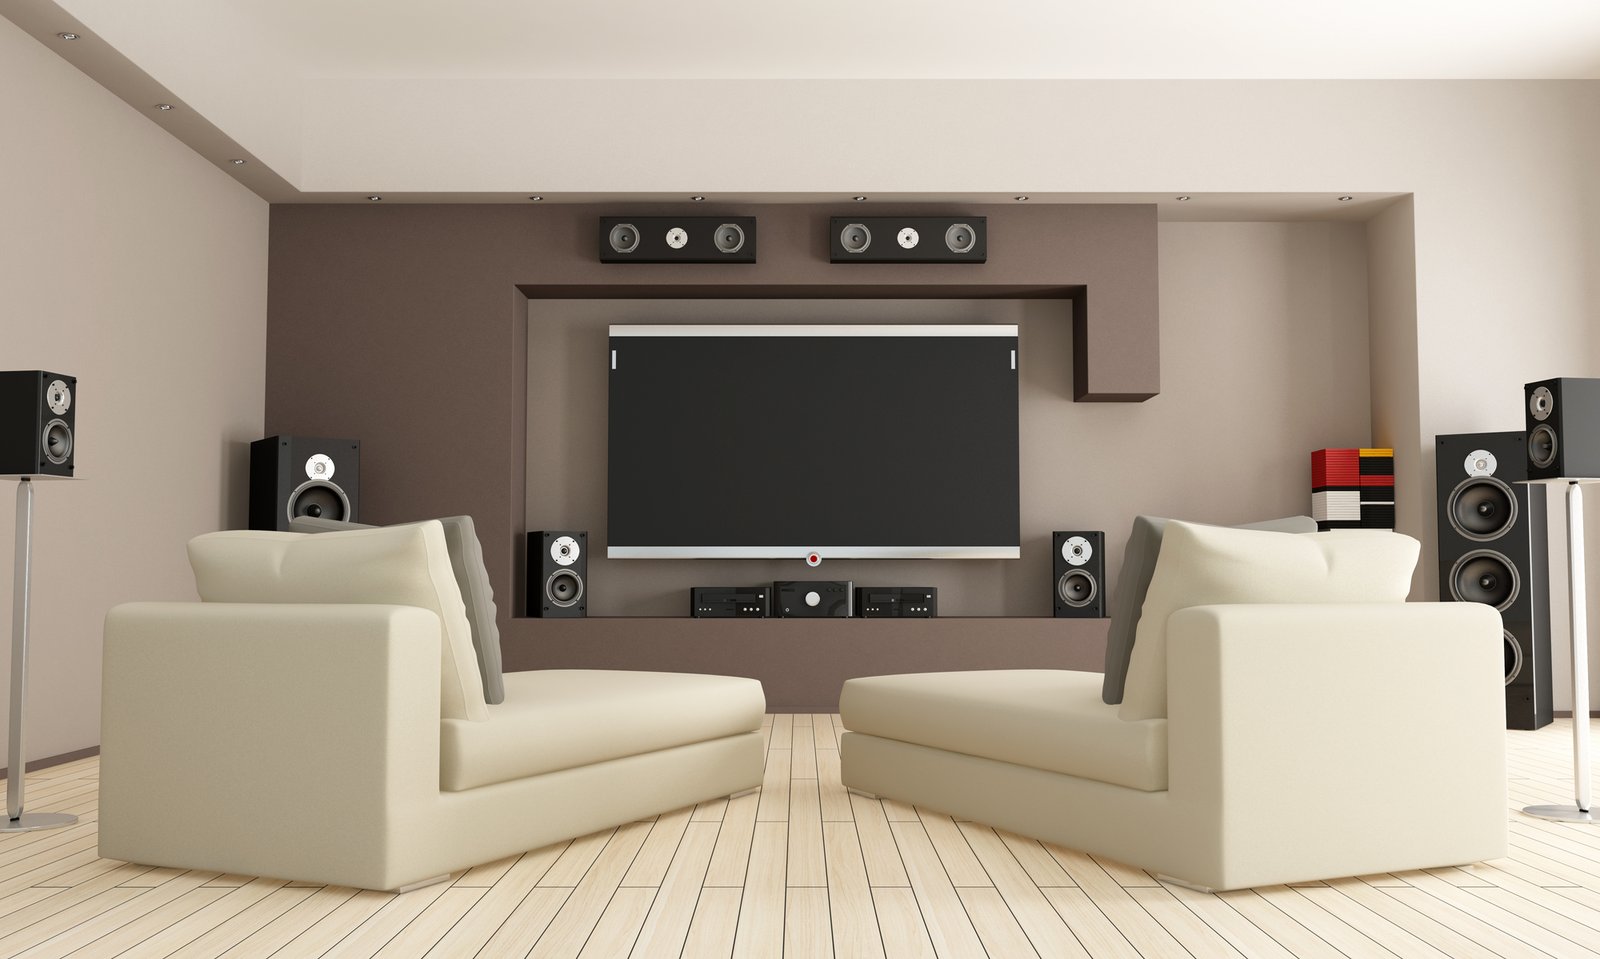 Home theater room with hi-fi sound system and white lounge chairs.